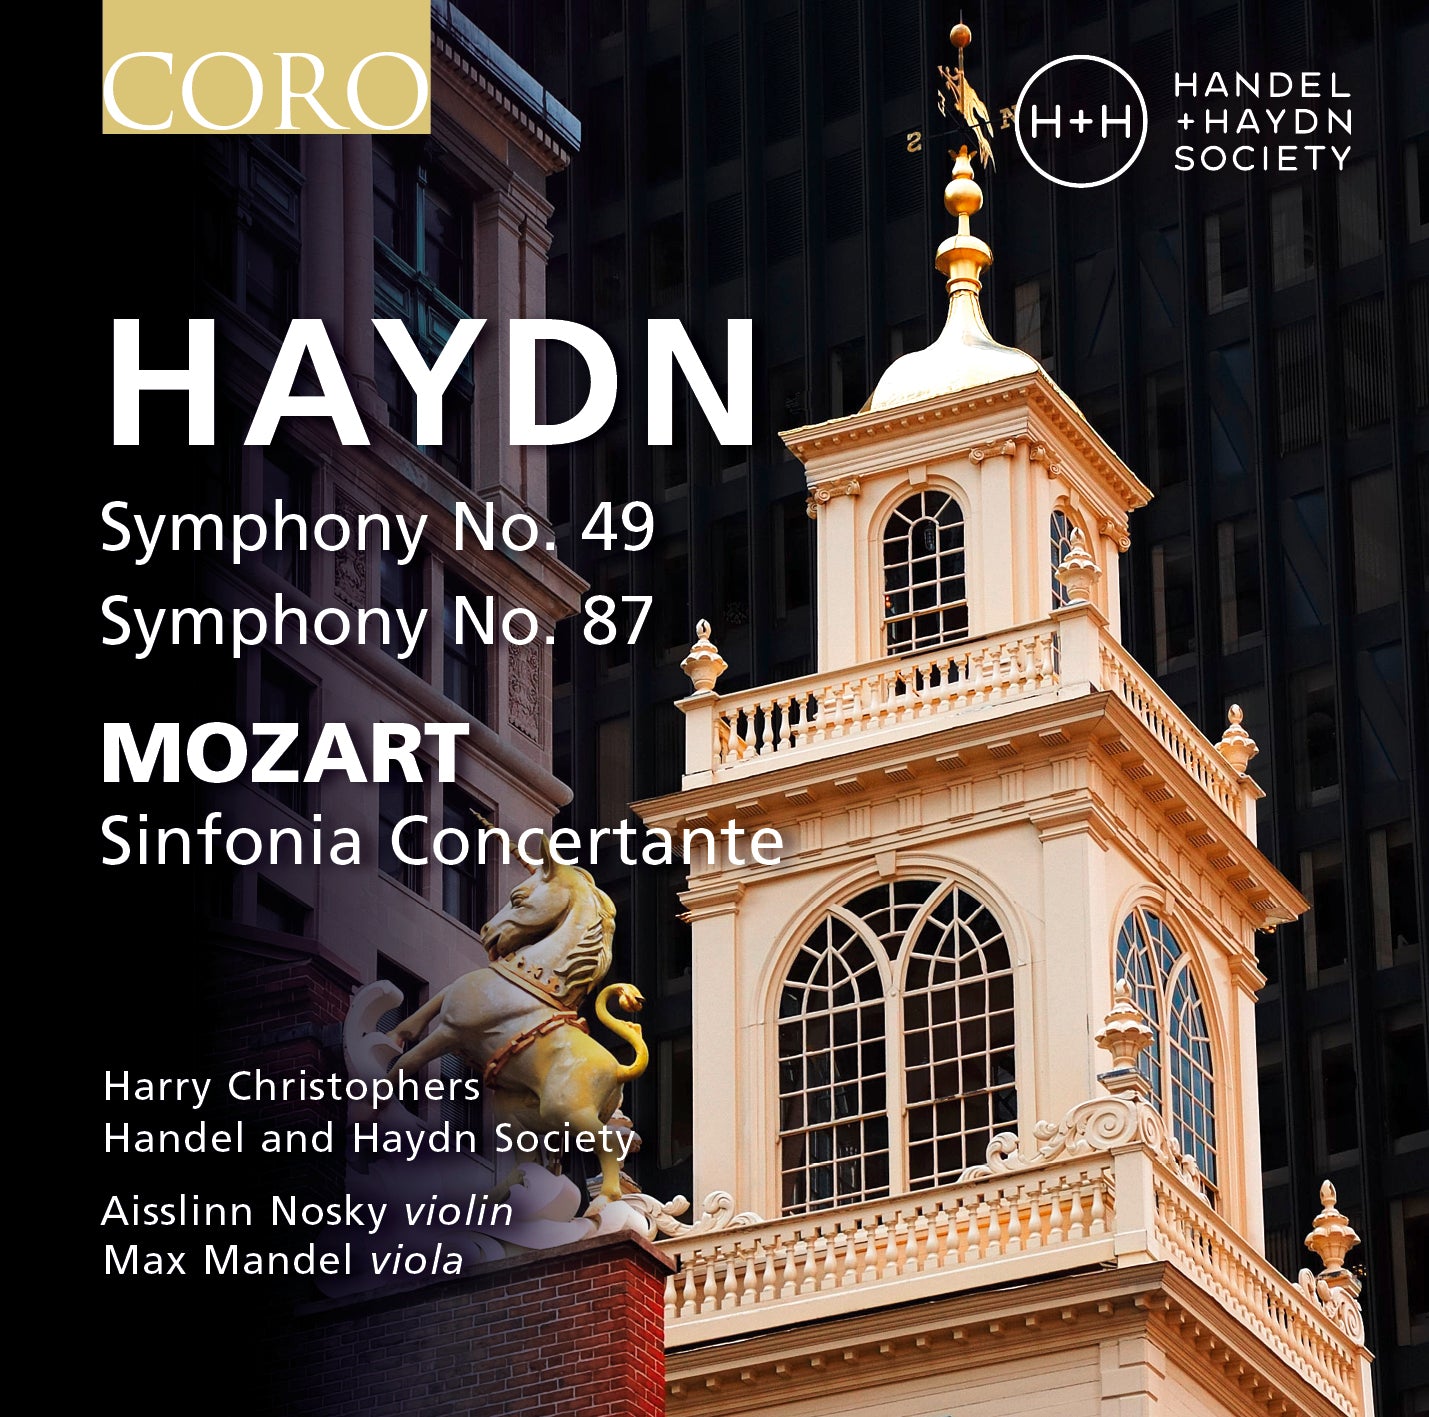 Haydn Symphonies No. 49 and No. 87. Album by the Handel and Haydn Society